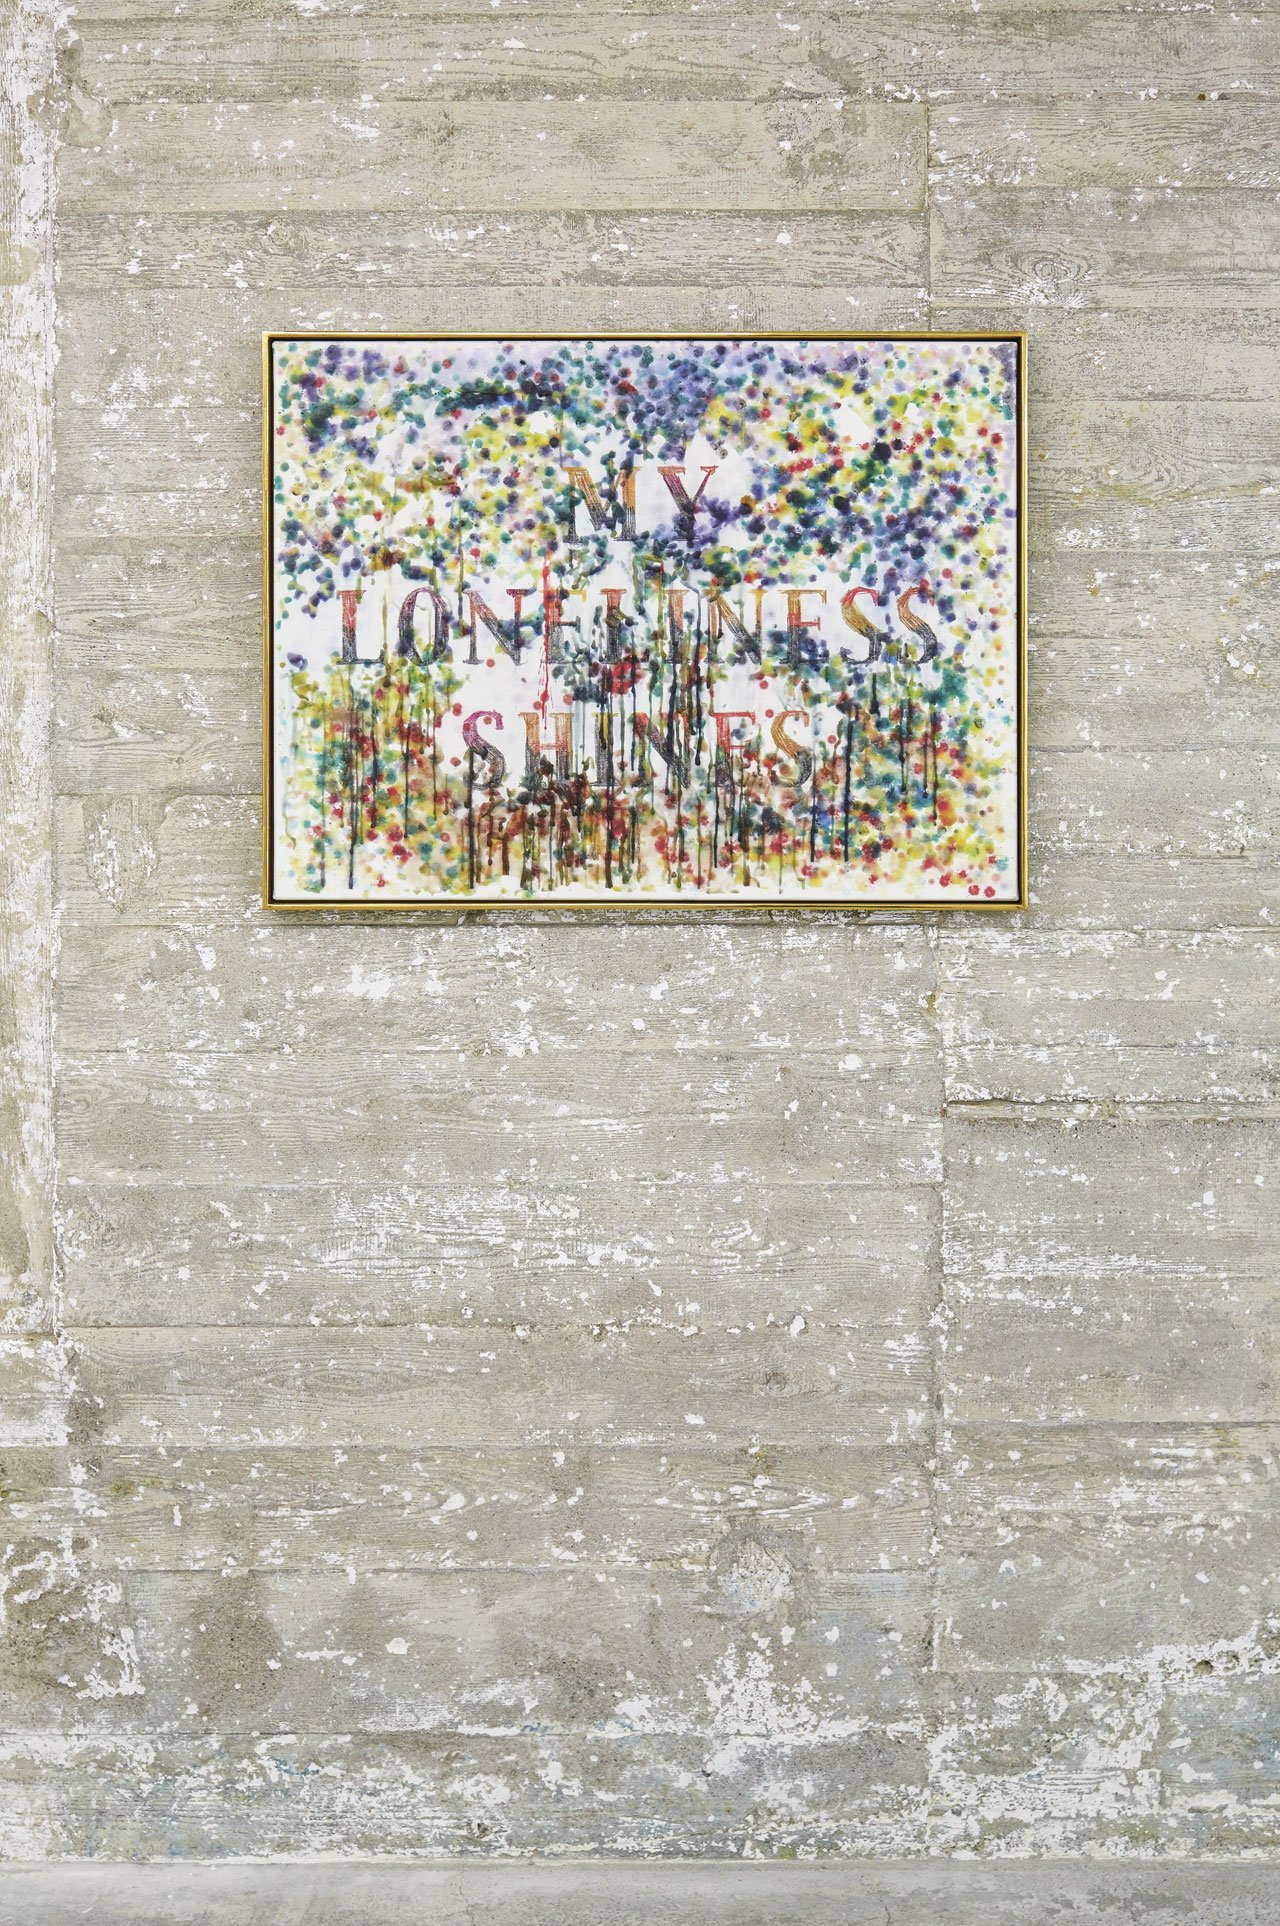 Friedrich Kunath, Ohne Titel (2006) | Wax crayon and colored pencil on canvas | 60 × 80 × 2 cm | Boros Collection, Berlin. Photo by NOSHE.